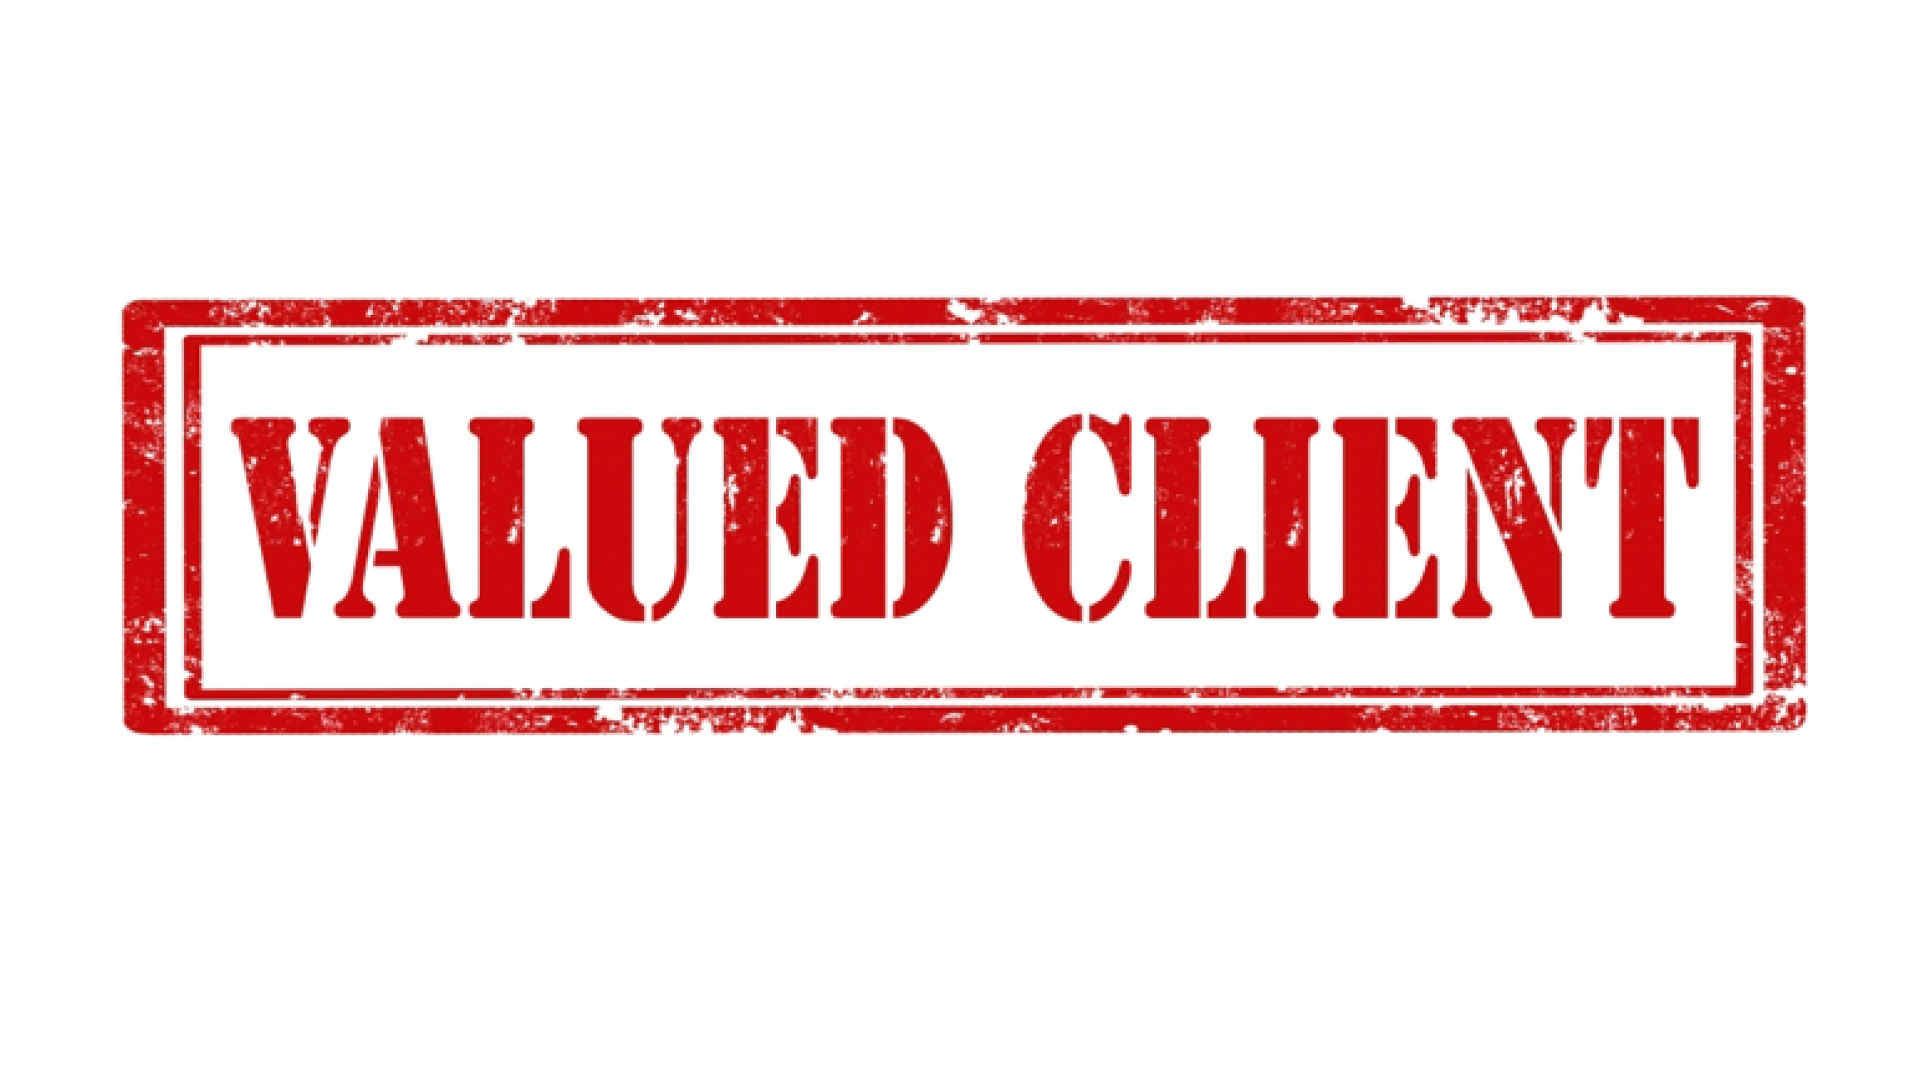 Valued client